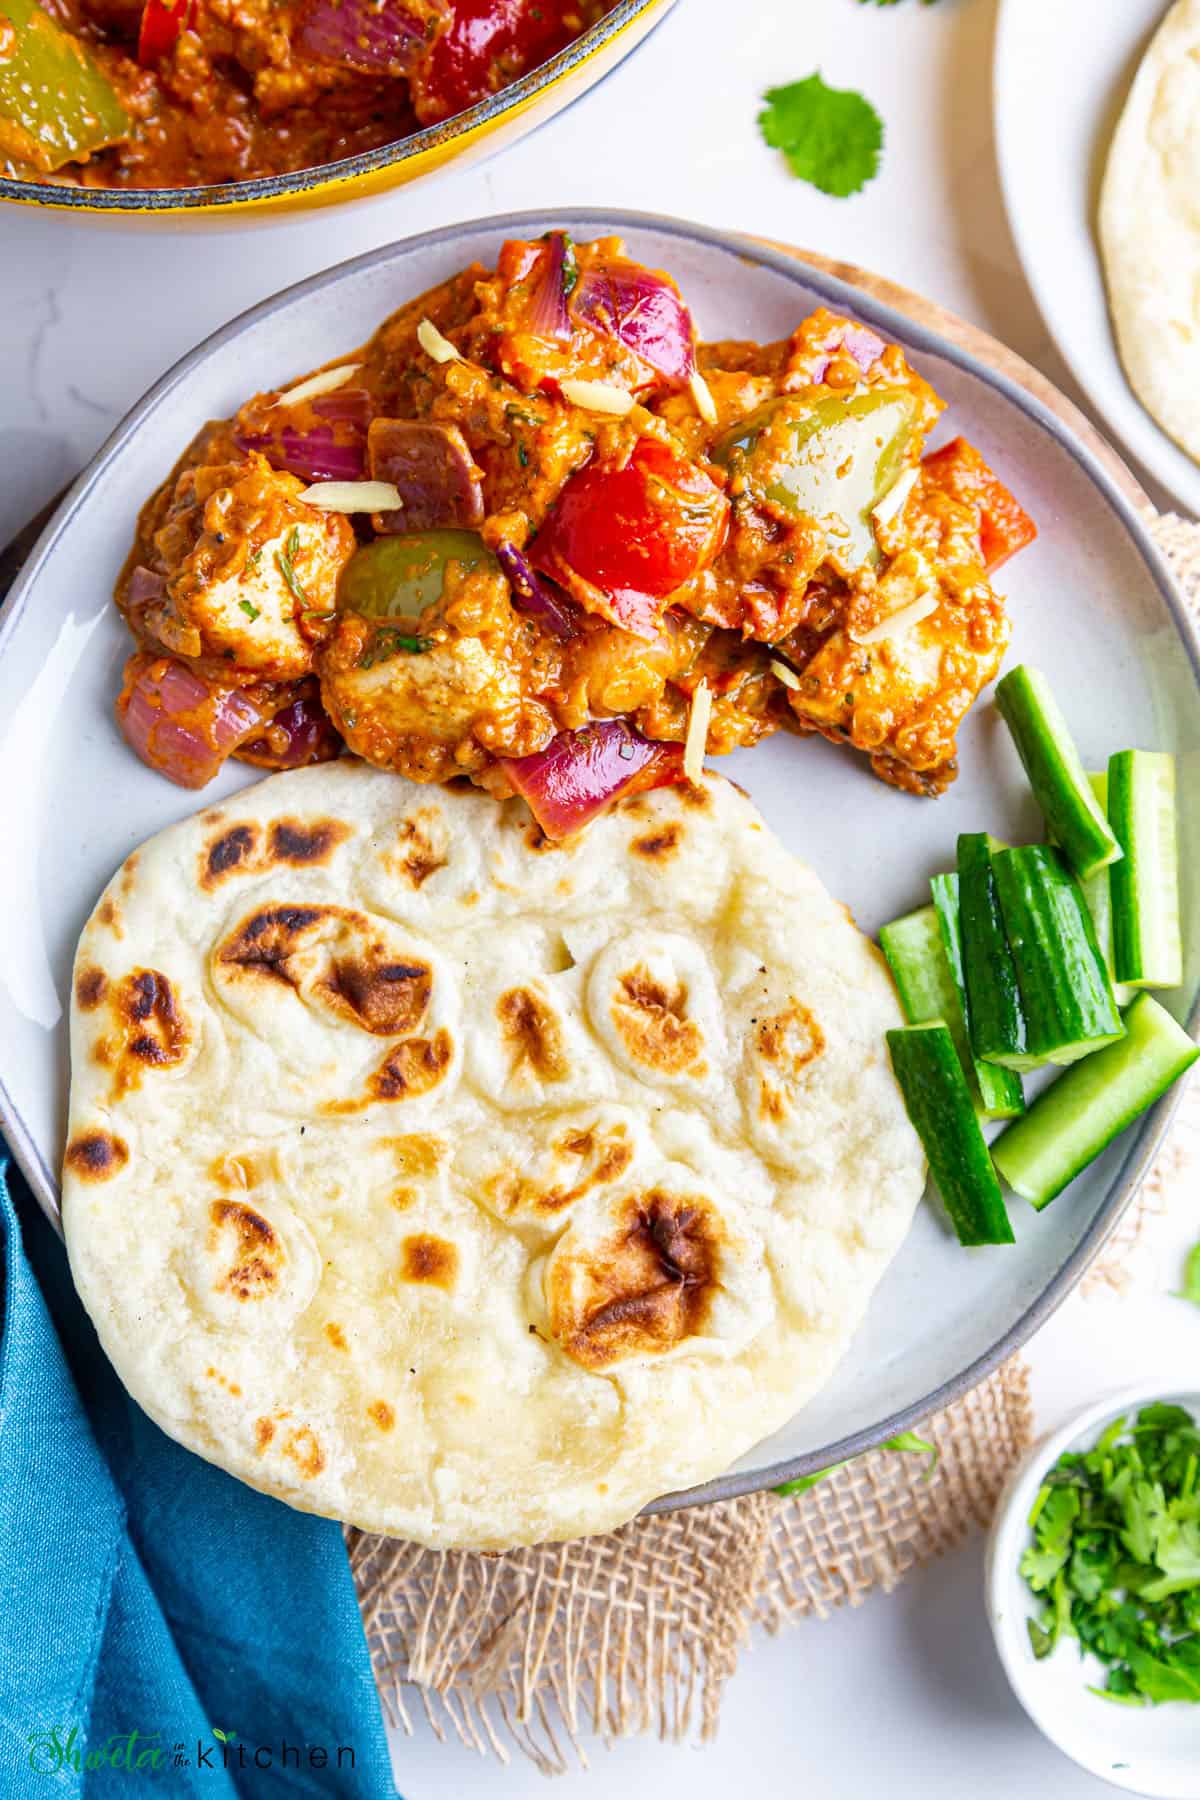 Plate with restaurant style kadai paneer, naan and cut cucumbers